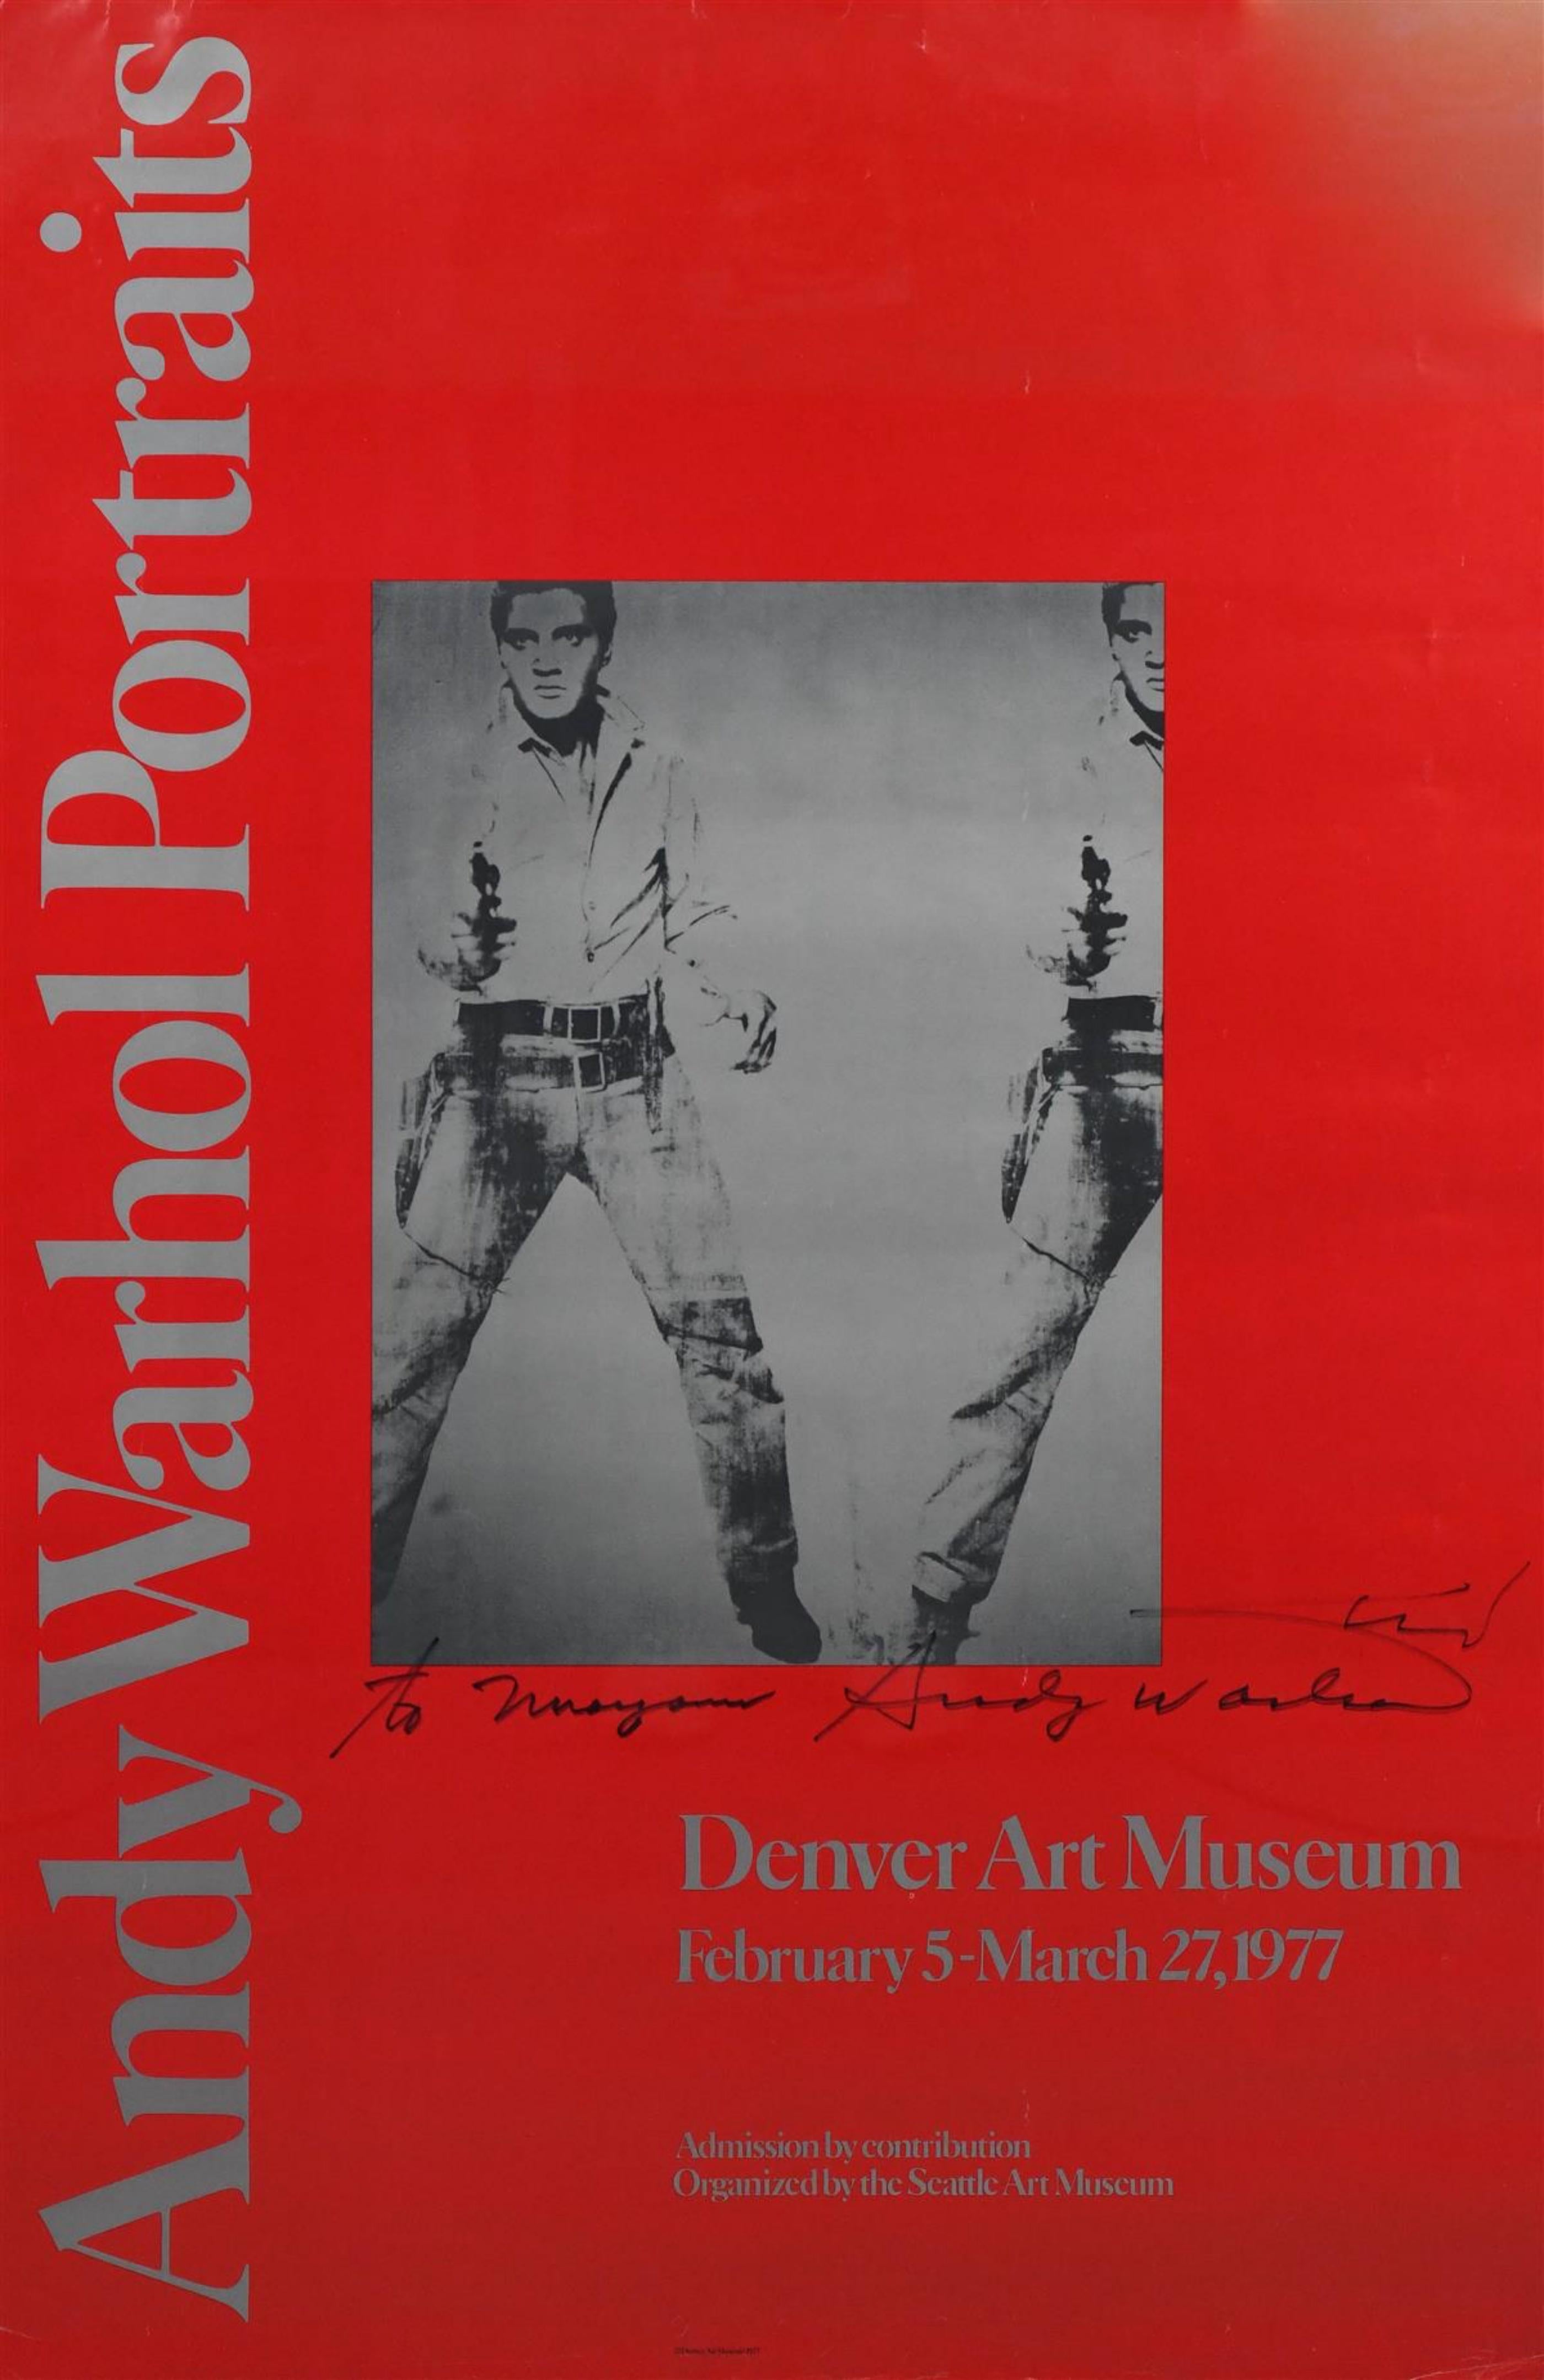 Andy Warhol
Exhibition Poster for Andy Warhol Exhibition at the Denver Art Museum
Double Elvis (Inscribed to Maryanne and hand signed twice by Andy Warhol), 1977
Hand signed and dedicated by Andy Warhol (from the Estate of Rick Collar)
Hand signed